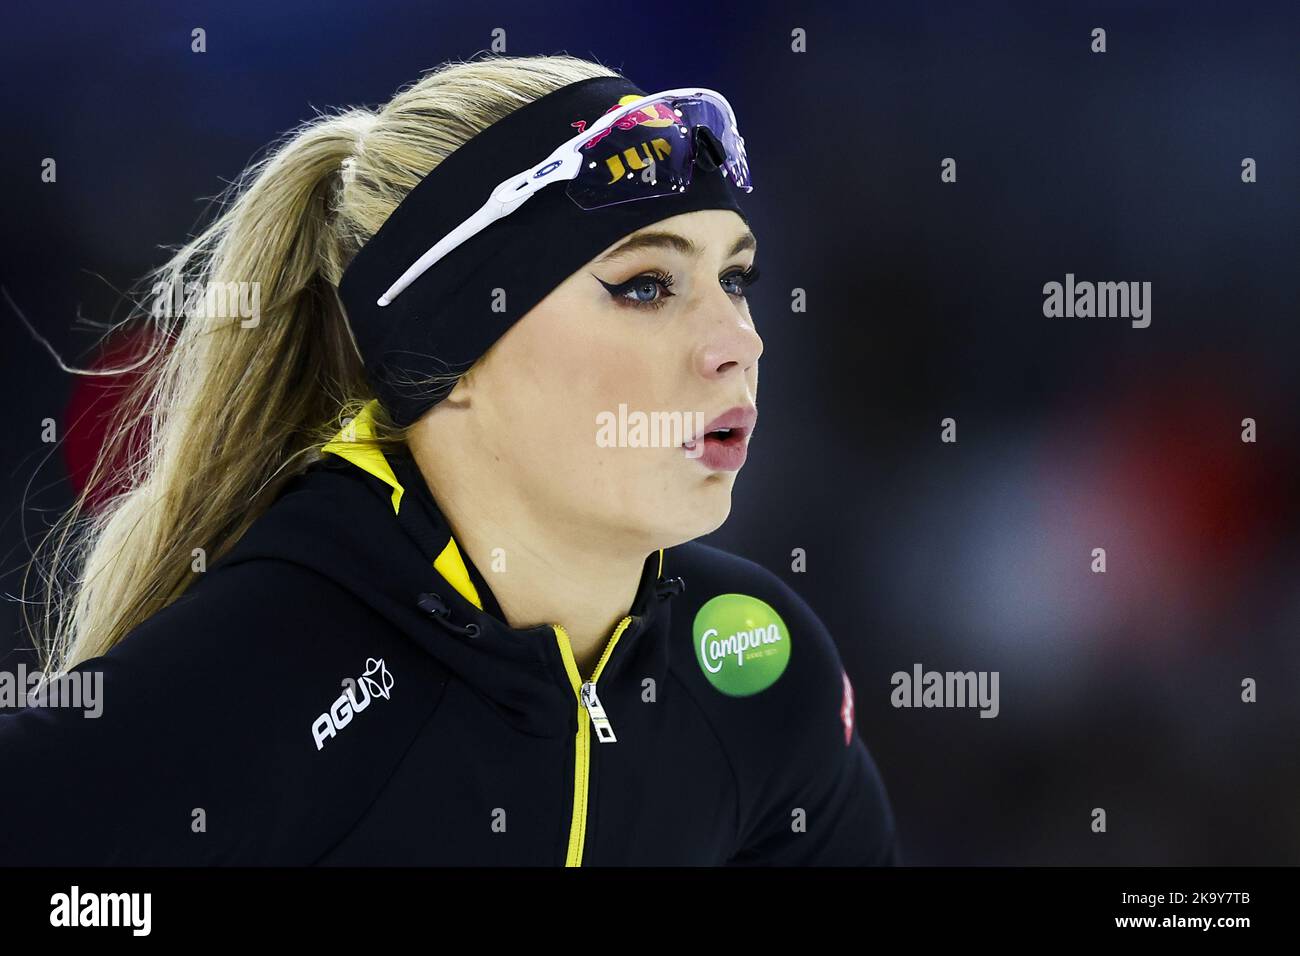 2022-10-30 16:36:52 HeereNVEEN - Jutta Leerdam reacts for the 1000 meters during the World Cup Qualifying Tournament in Thialf. ANP VINCENT JANNINK netherlands out - belgium out Stock Photo